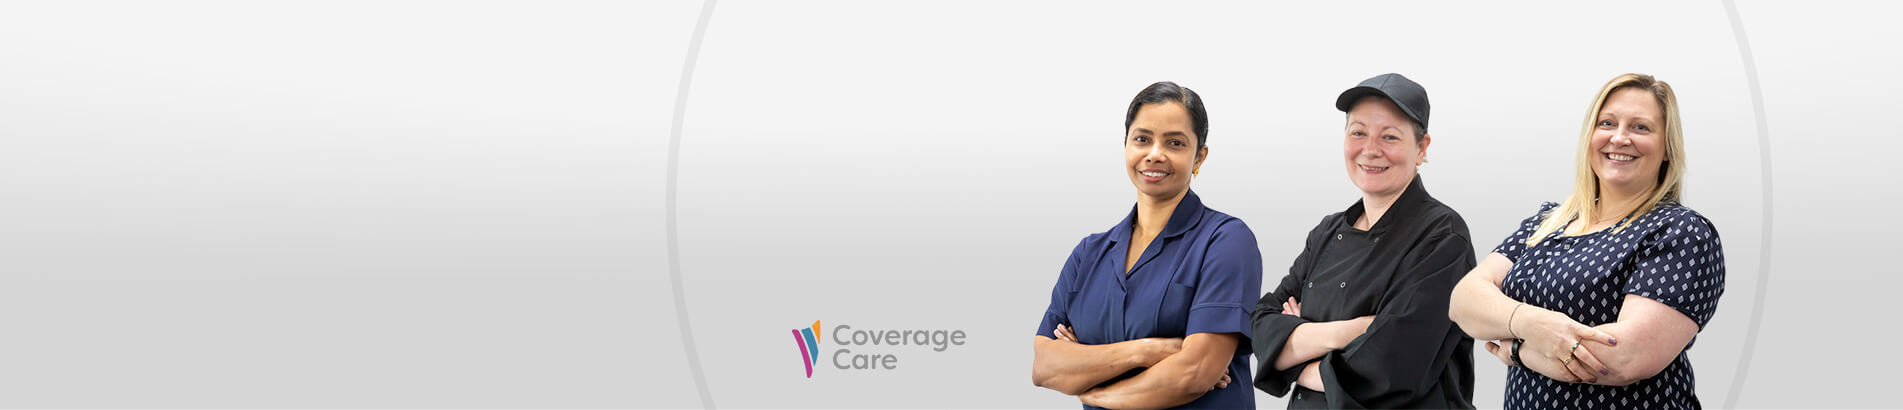 Coverage Care Home Support Roles